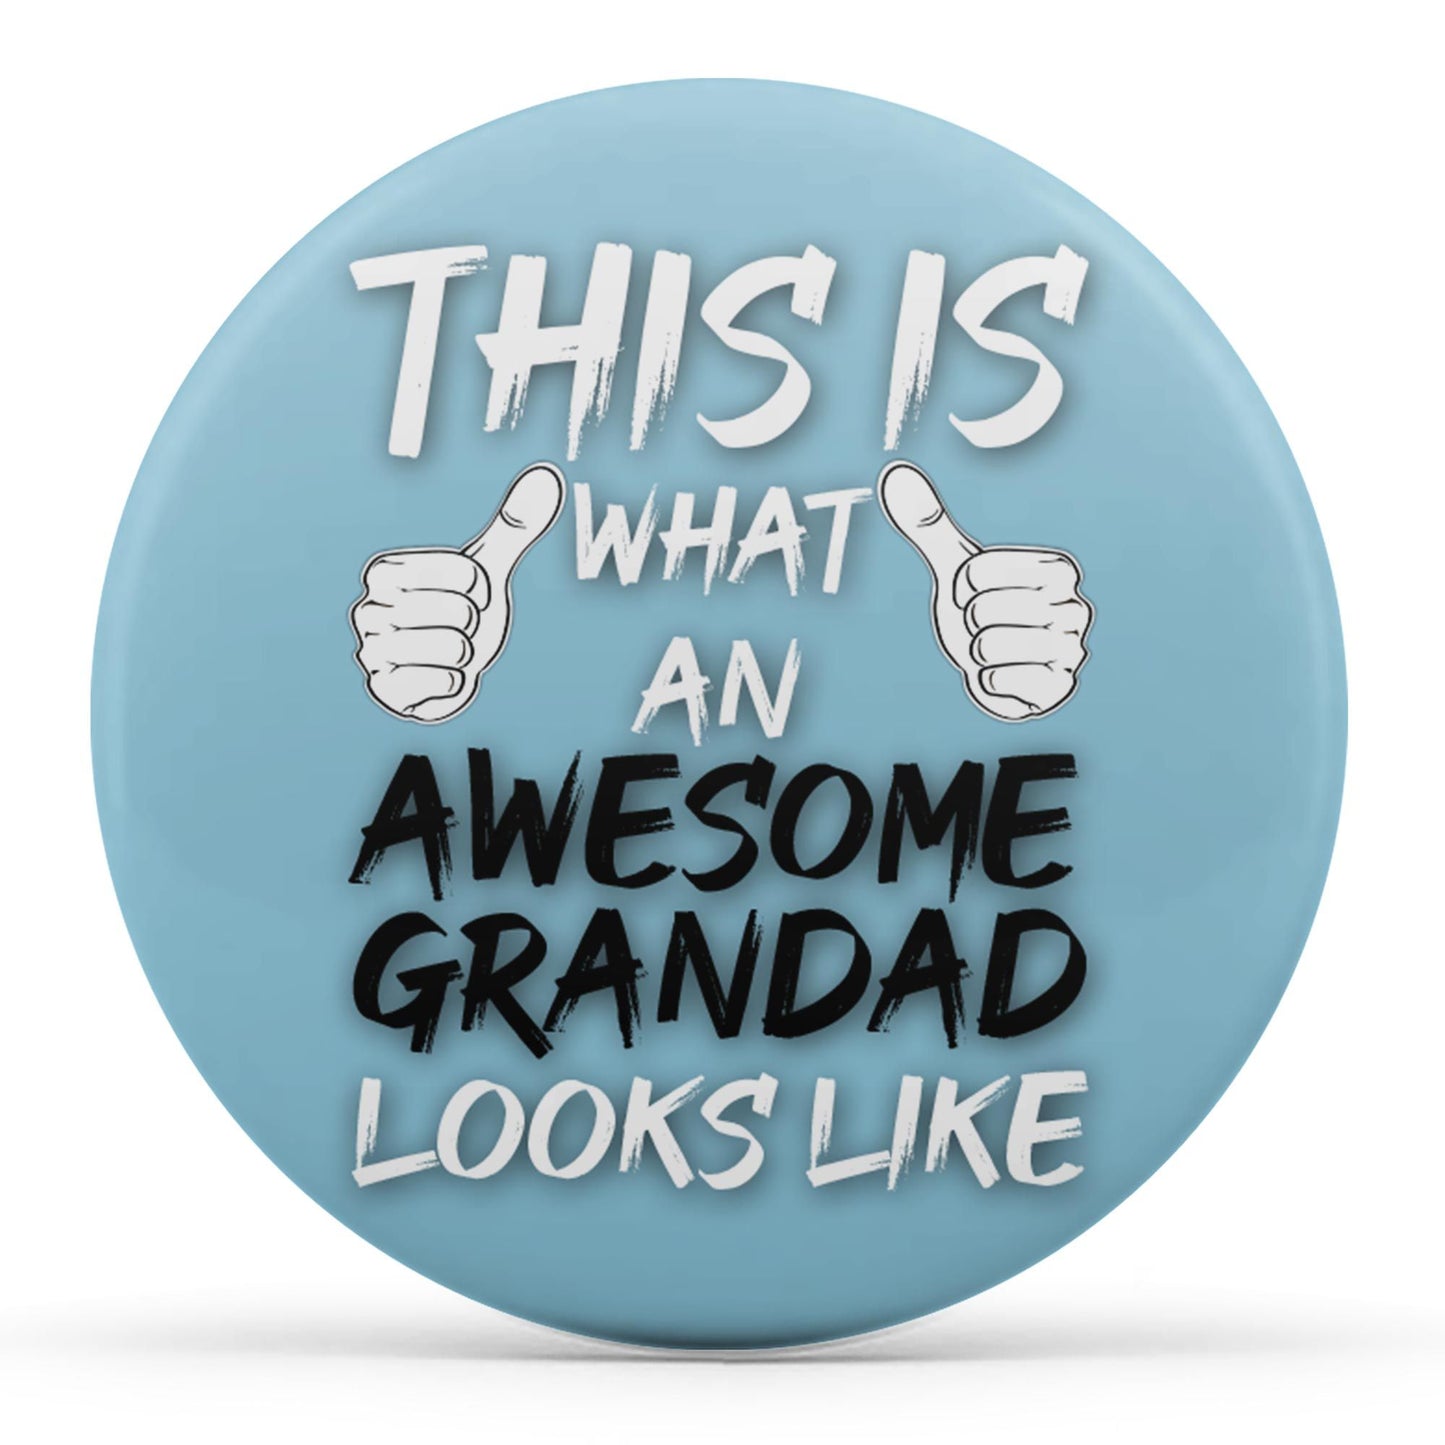 This Is What An Awesome Grandad Looks Like Image